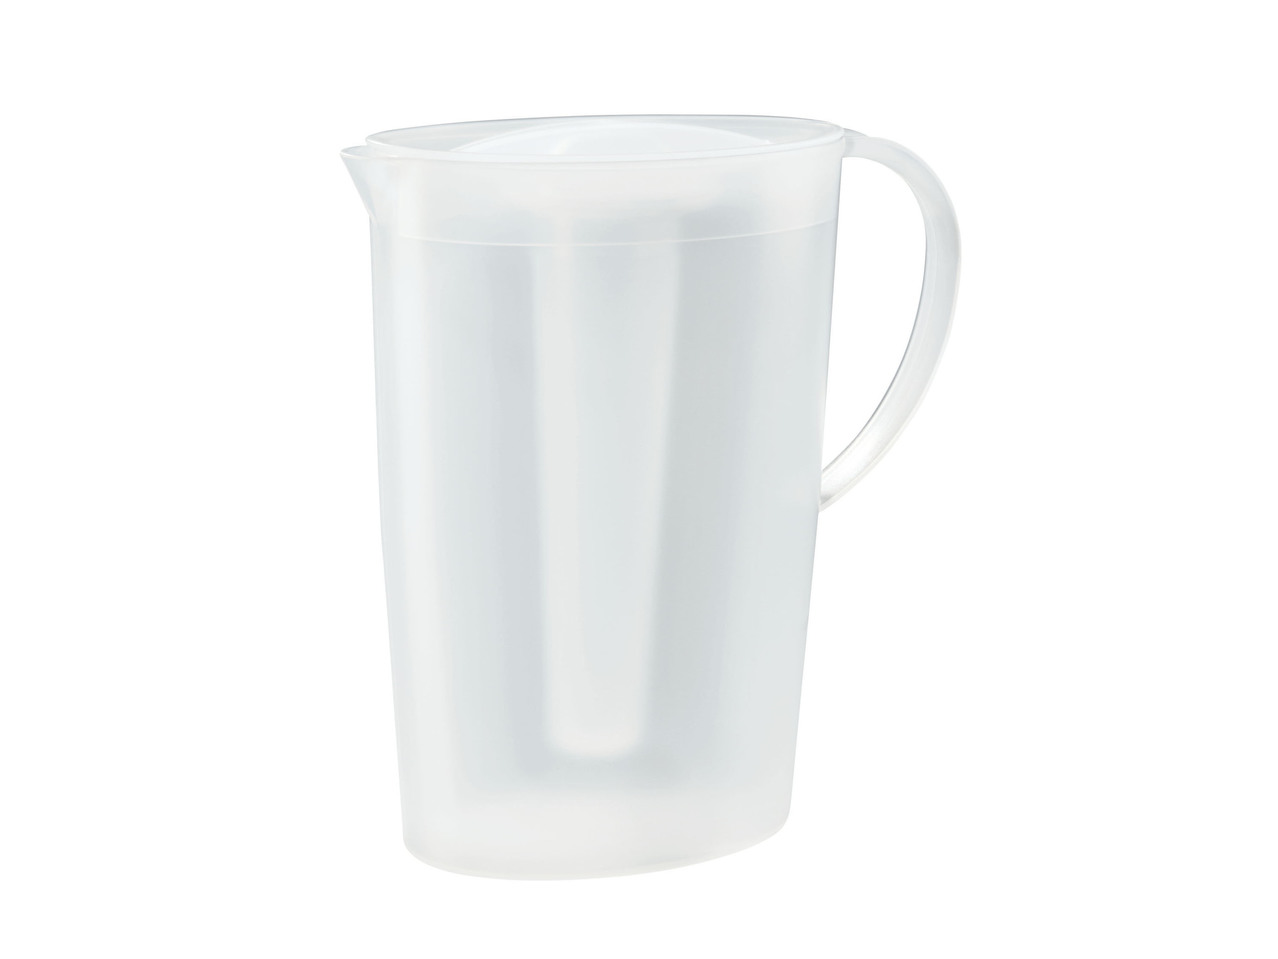 Jug with Cooler Insert